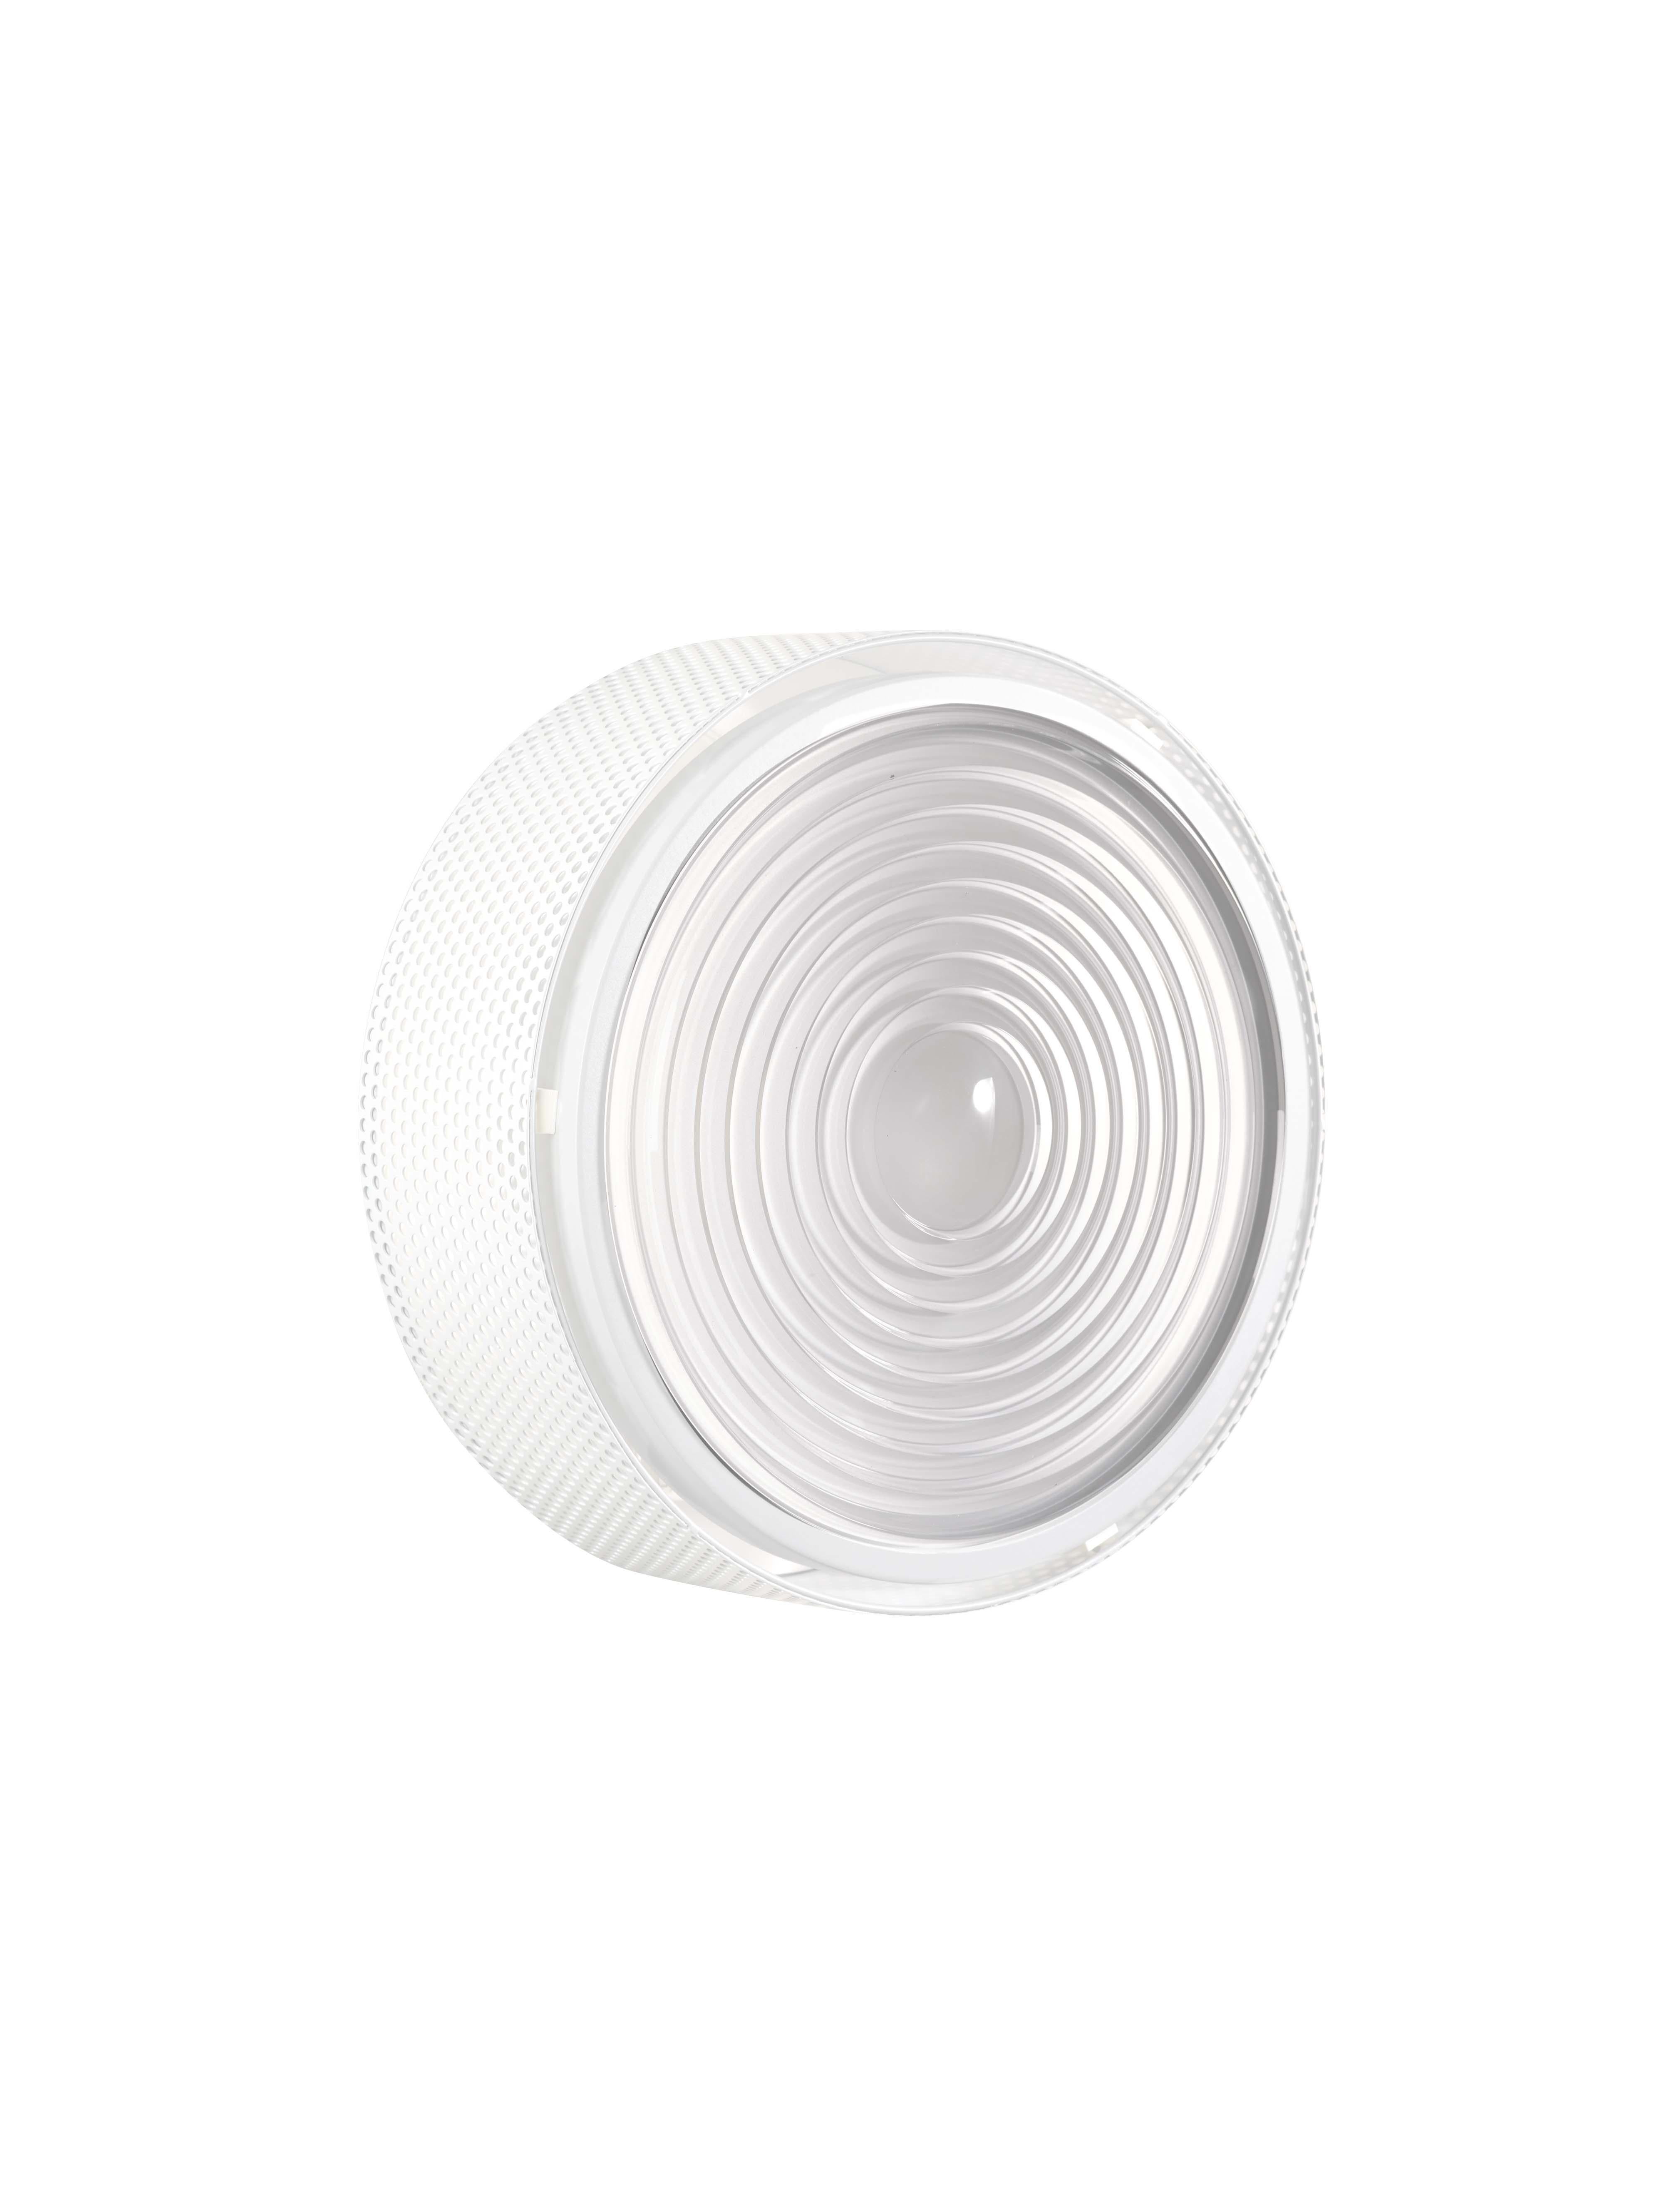 Large Pierre Guariche 'G13' Wall or Ceiling Light for Sammode Studio in White For Sale 1